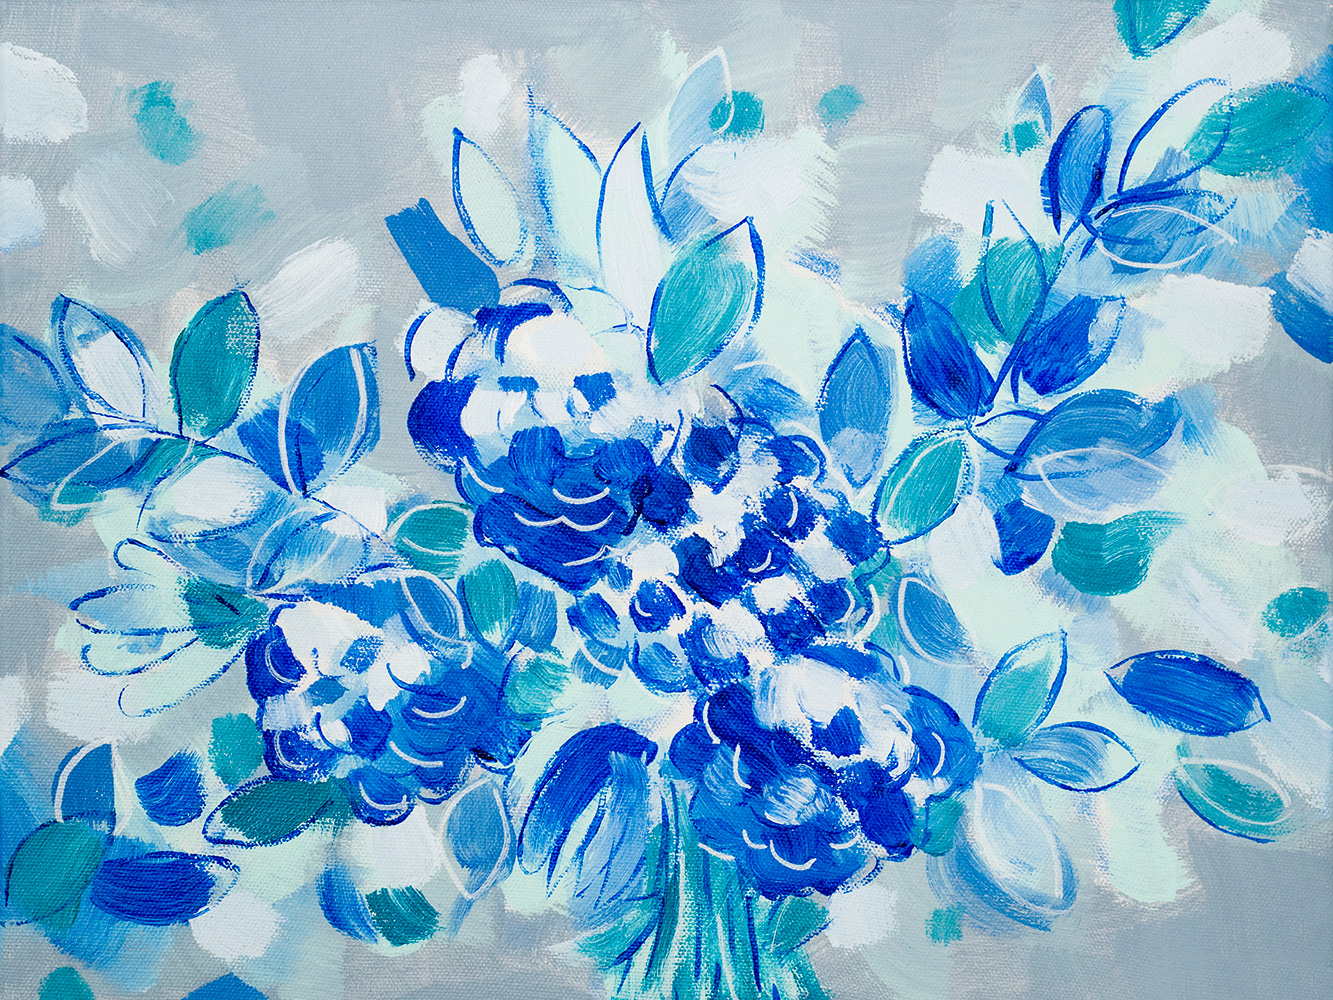 Franziska Schwade - Daily Painting 151102 "Wedding Blues" Acrylics on stretched canvas 40x30 cm / 15.7x11.8 inch